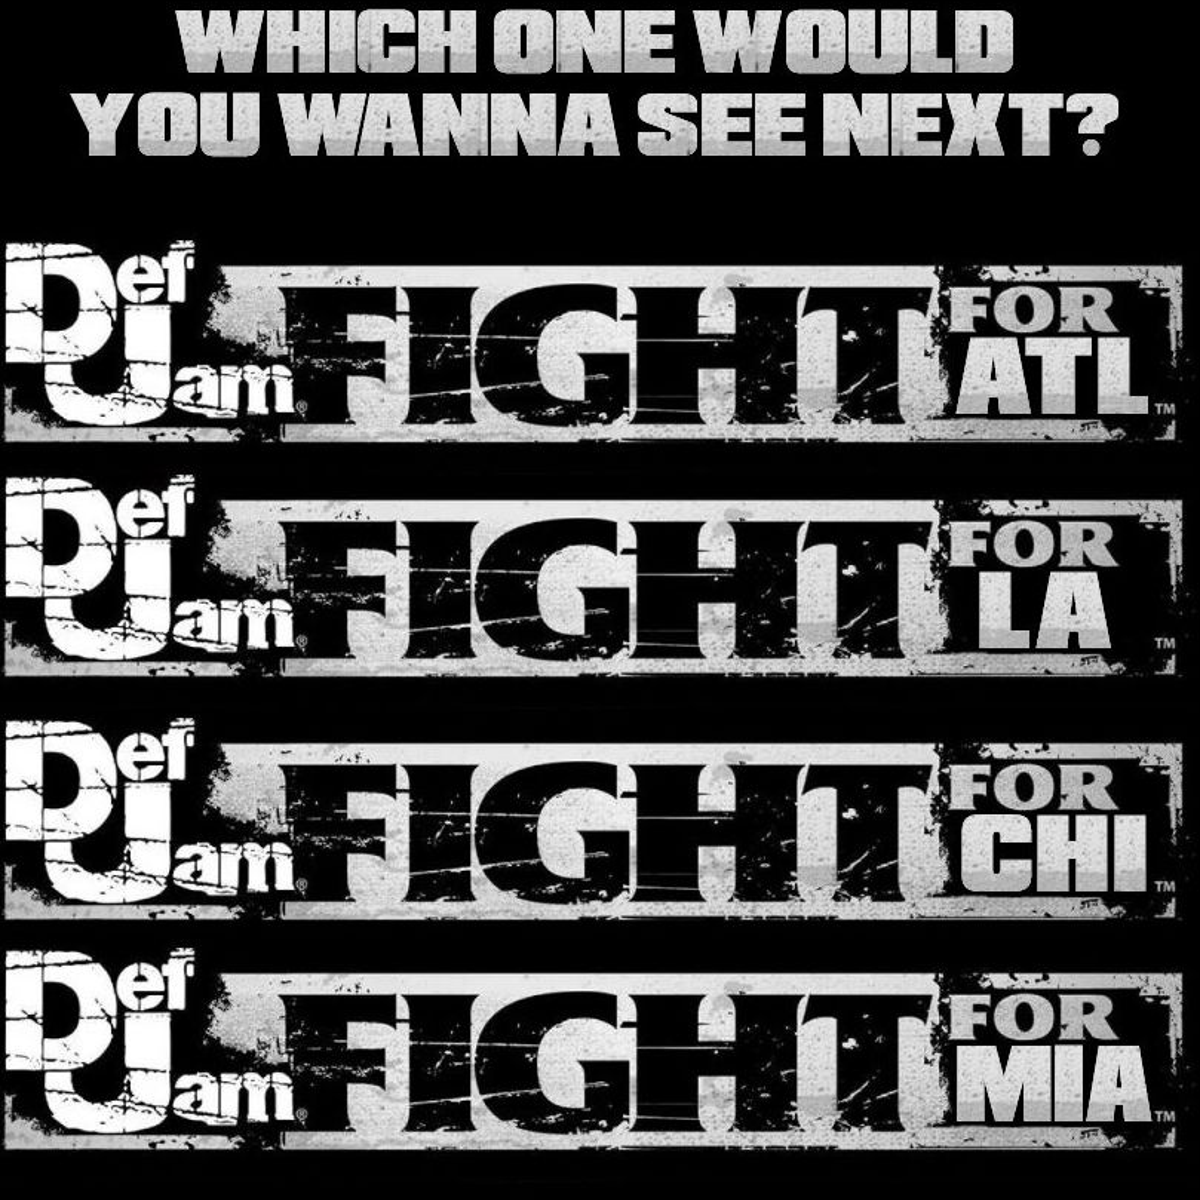 Def Jam Recordings could be teasing a new Def Jam: Fight game